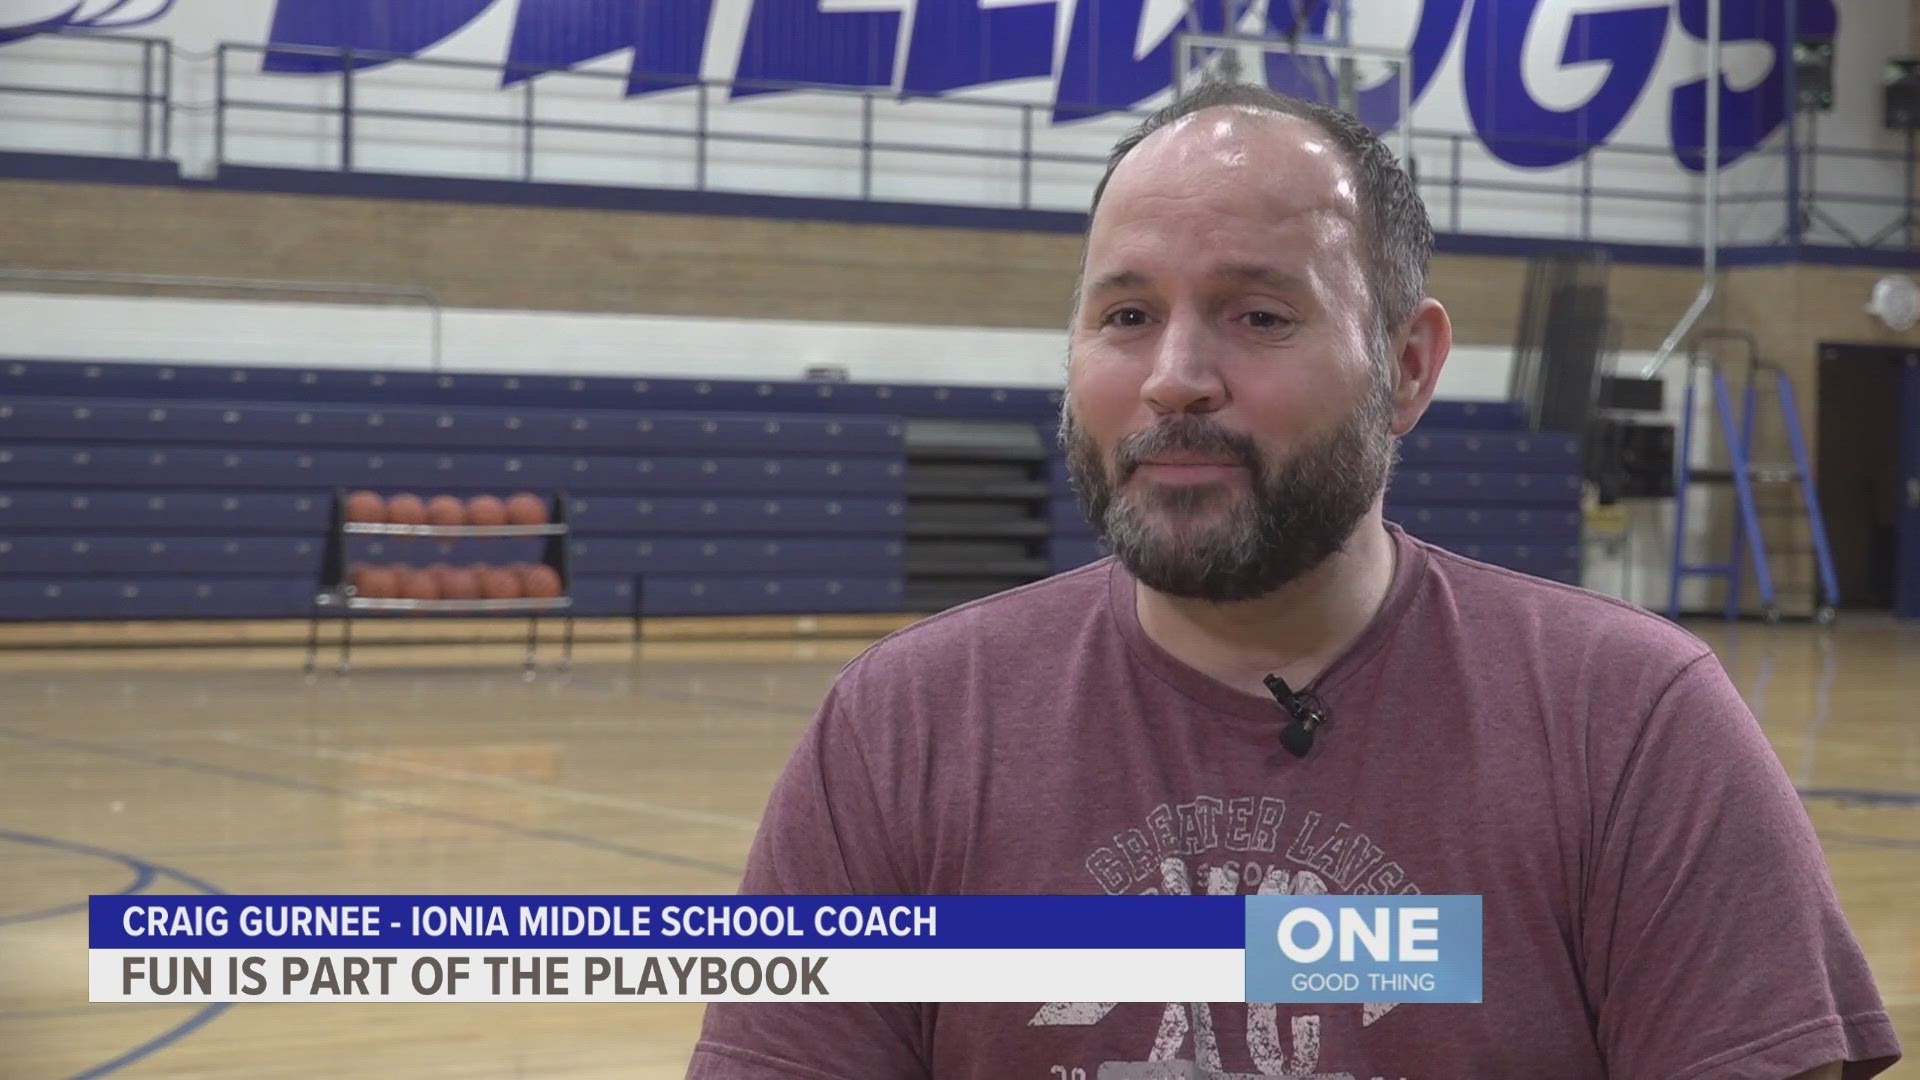 Craig Gurnee has gained quite a crowd following his half-court shot videos on TikTok, but there's a deeper story behind this coach's fun-loving nature.